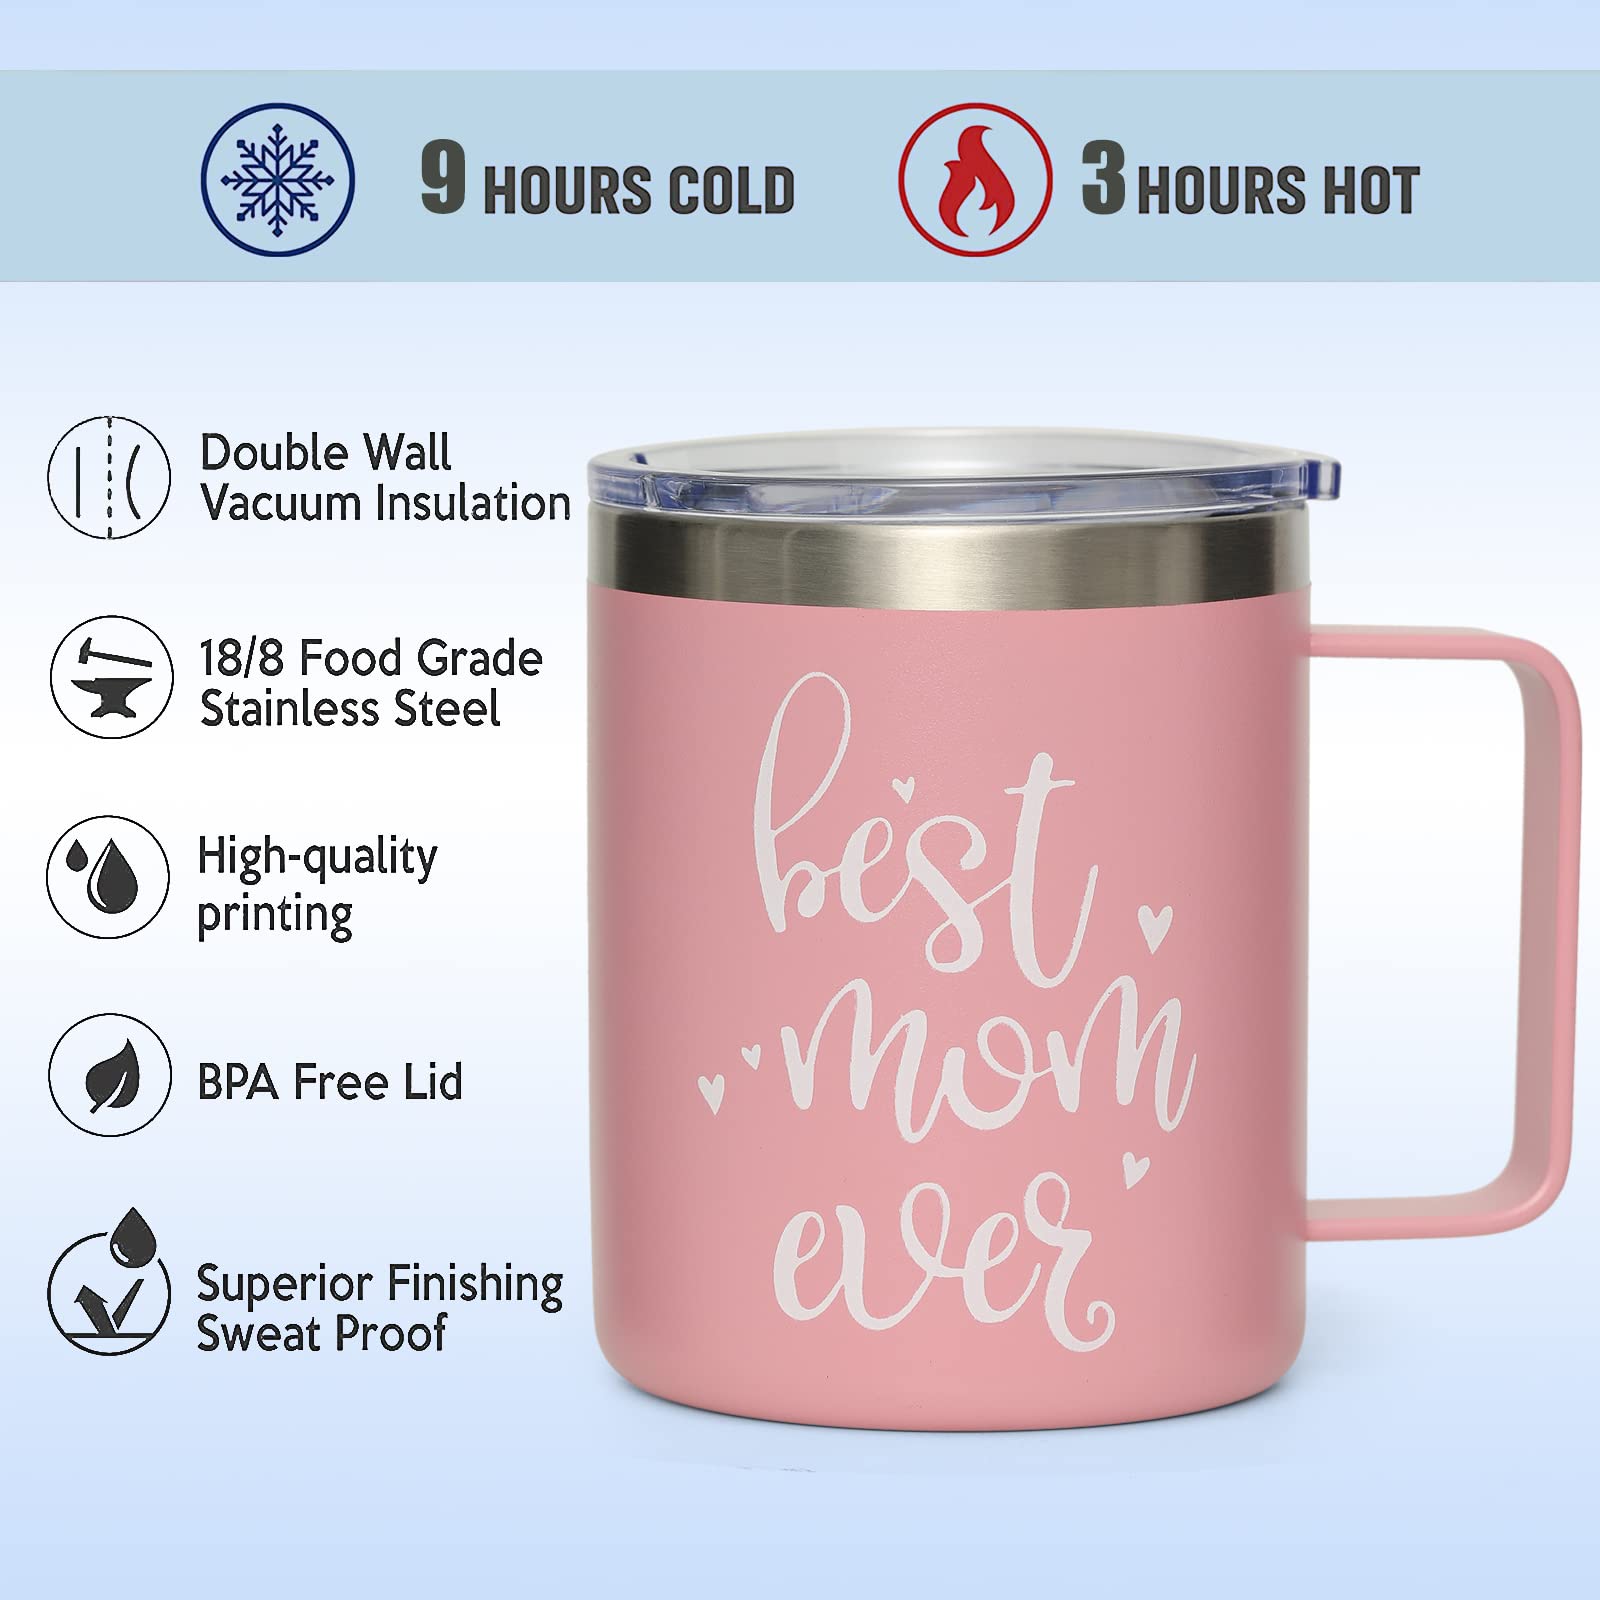 Best Mom Ever Coffee Mug- Best Mothers Day Gifts from Daughter,Son,Kids- Unique Christmas Gifts for Mom,Women,Wife- Novelty Birthday Gifts Idea for Mom